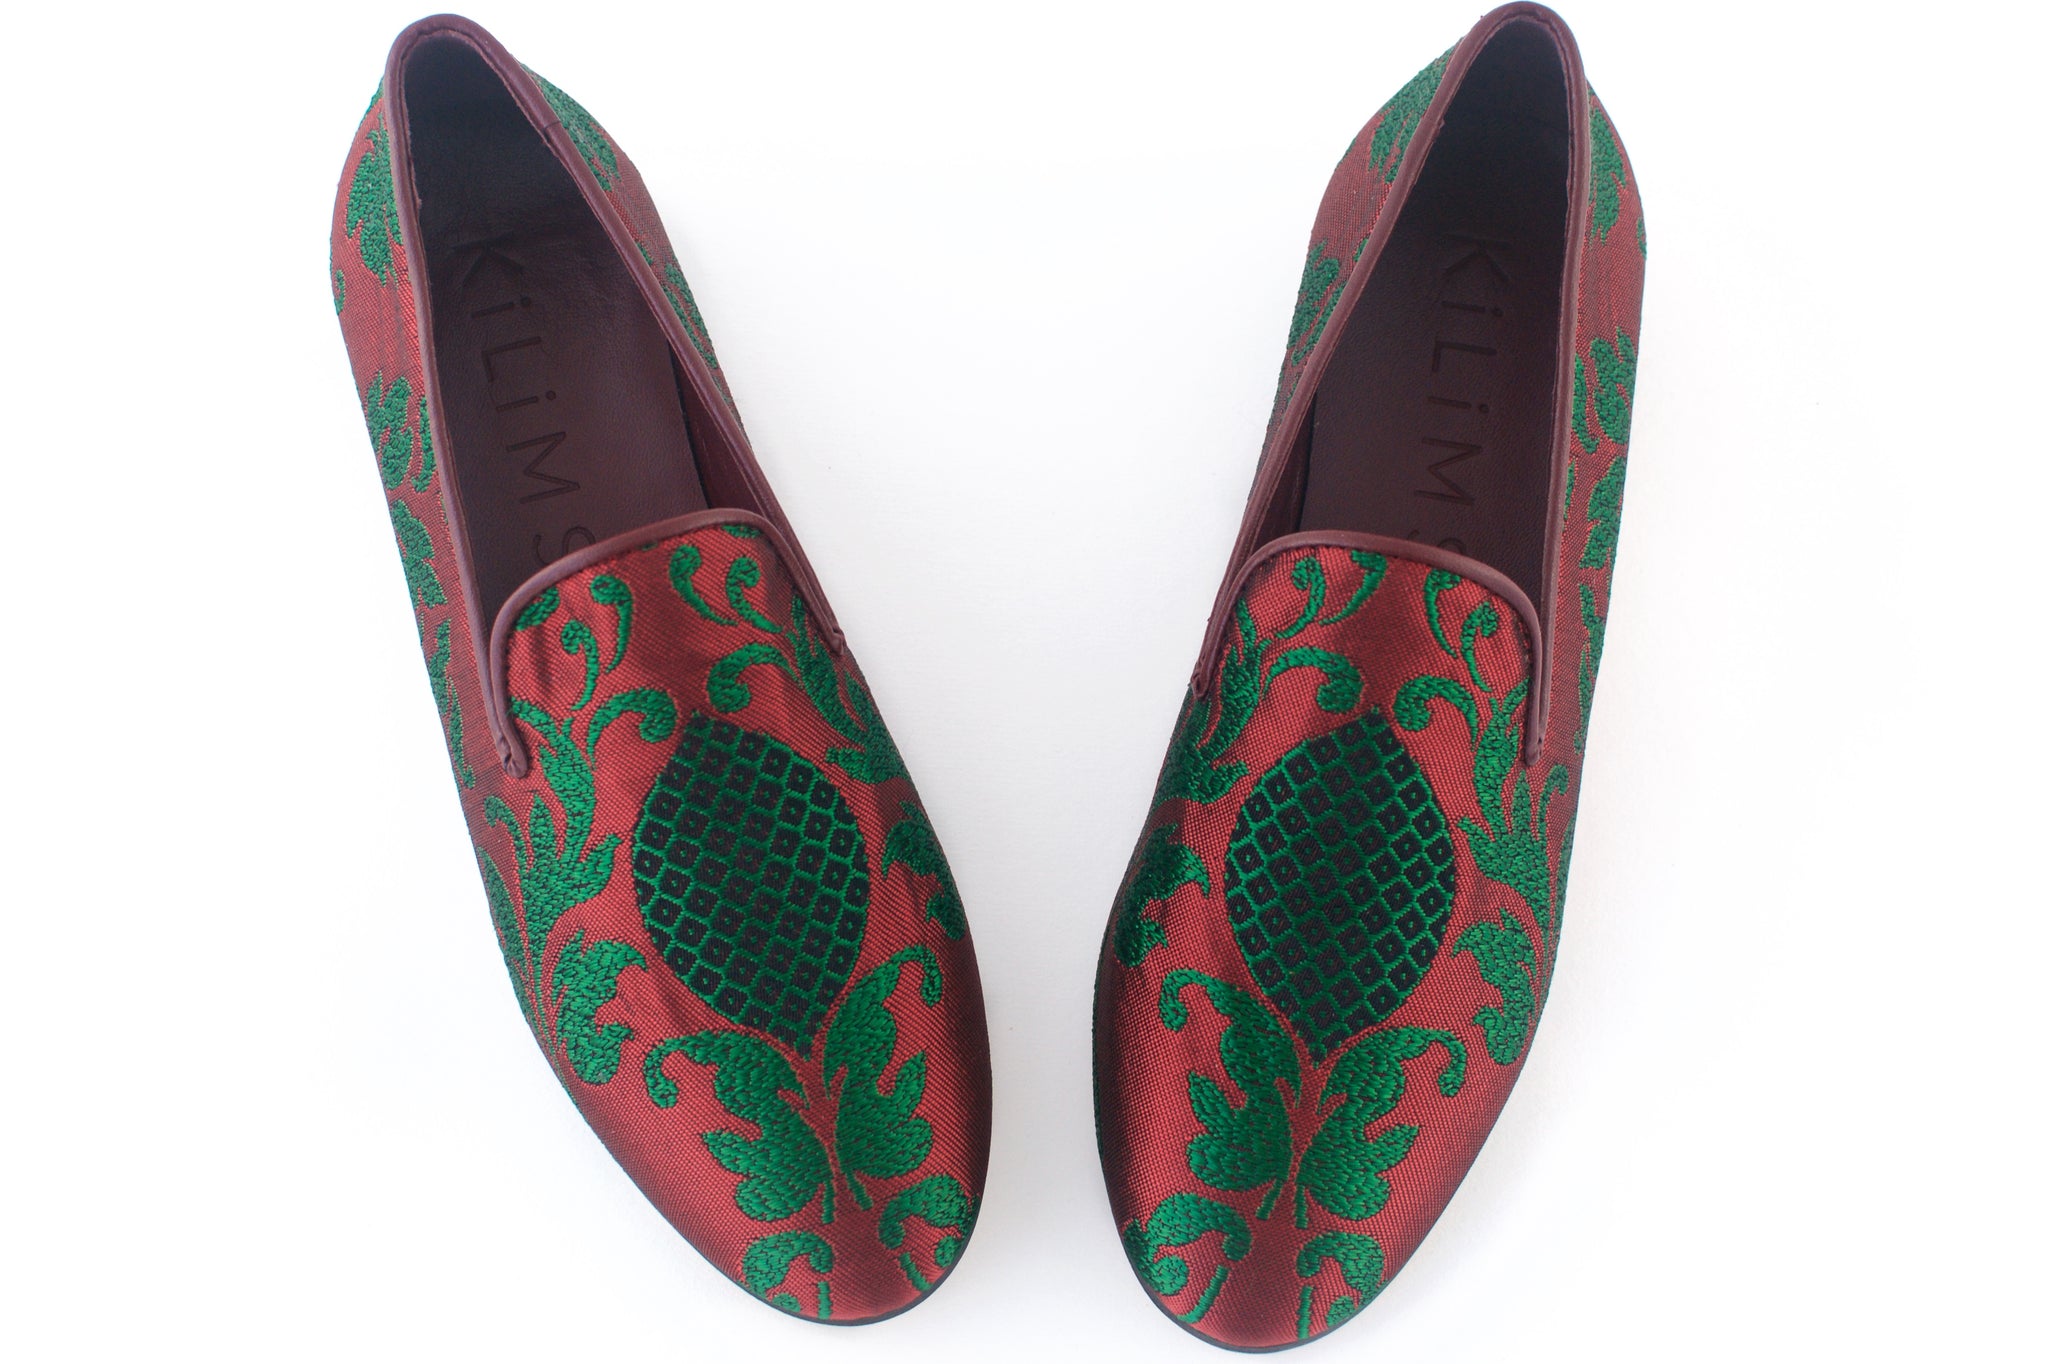 Women's Burgundy Brocade Slippers – Kilims by the makers